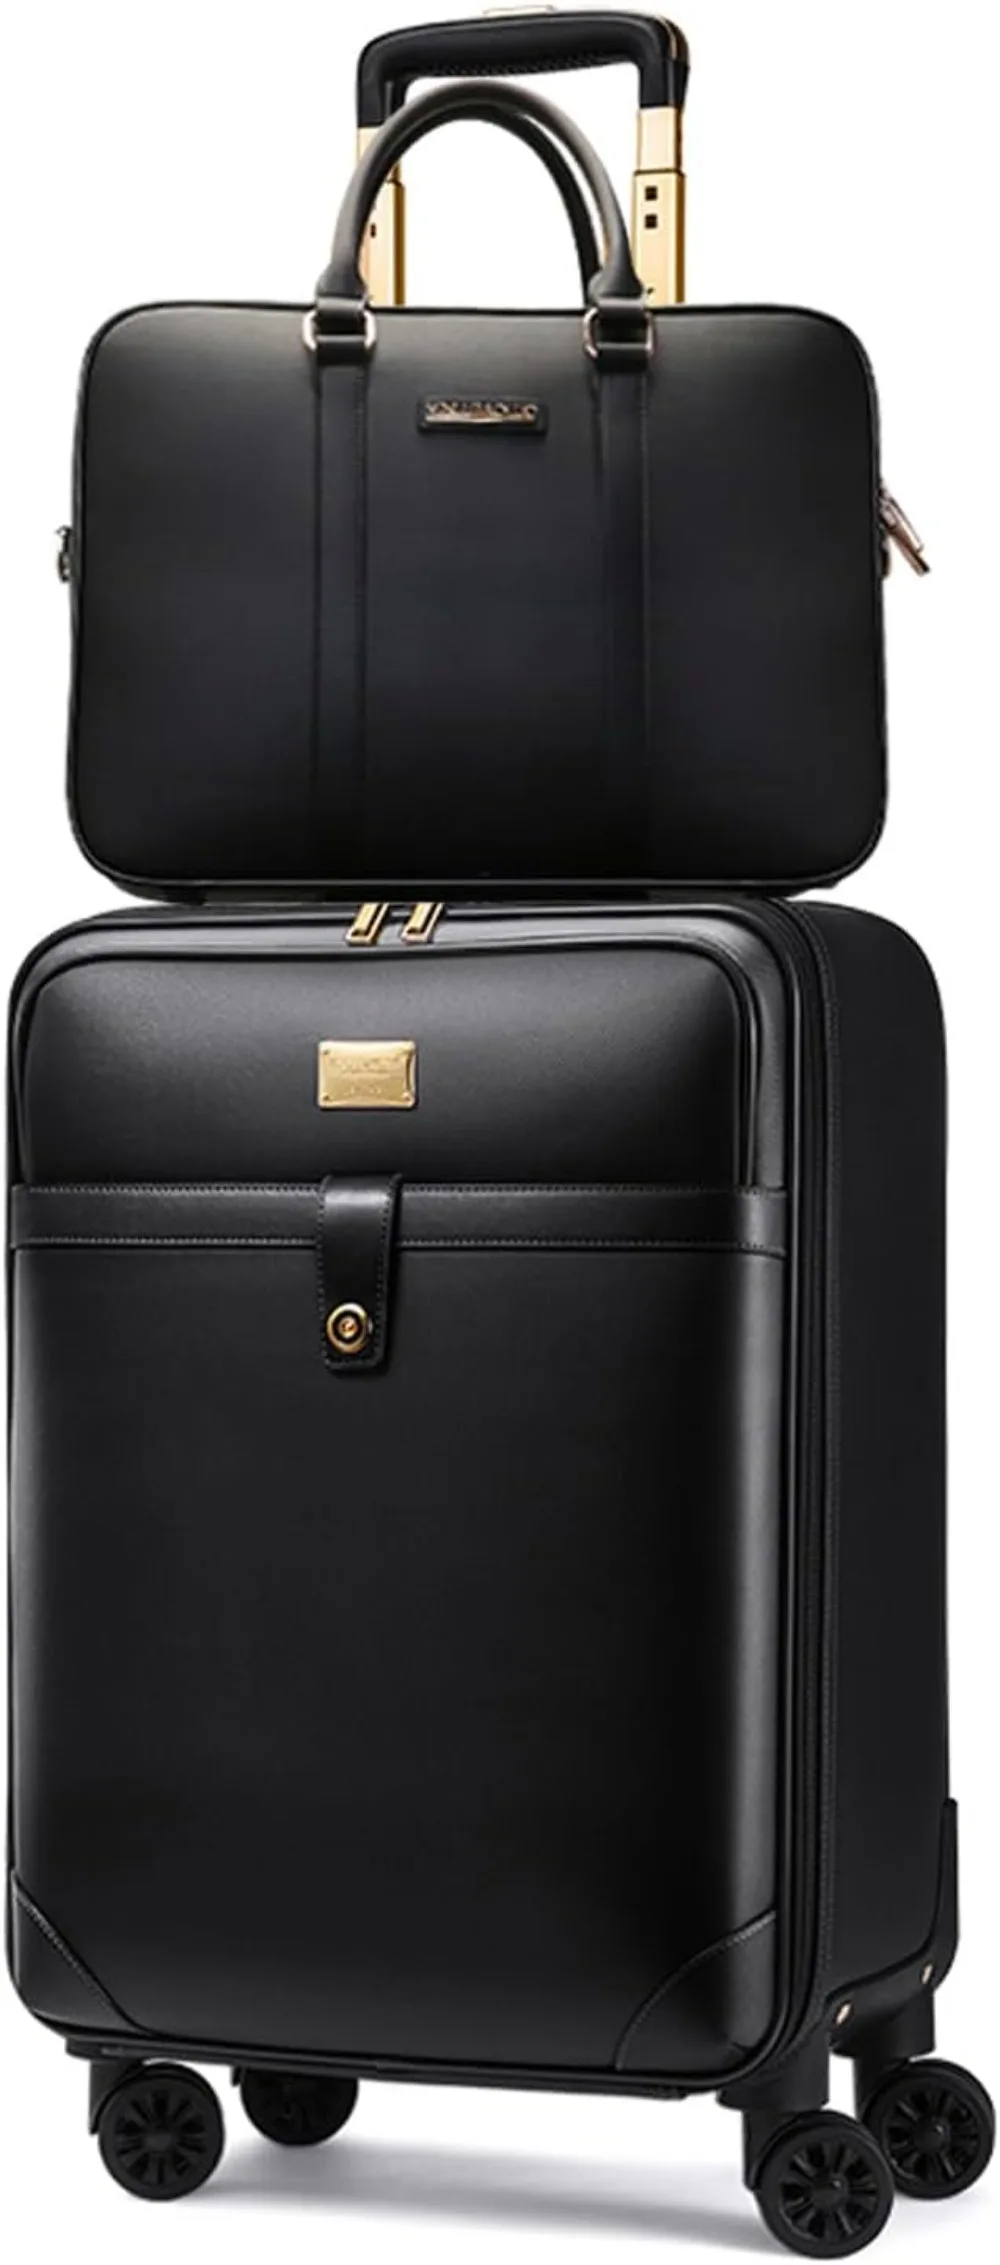 

18 Inch Carry On Luggage With Spinner Wheels，Mans Suitcase With TSA Lock For Business Trip,Soft Sided Luggage Set